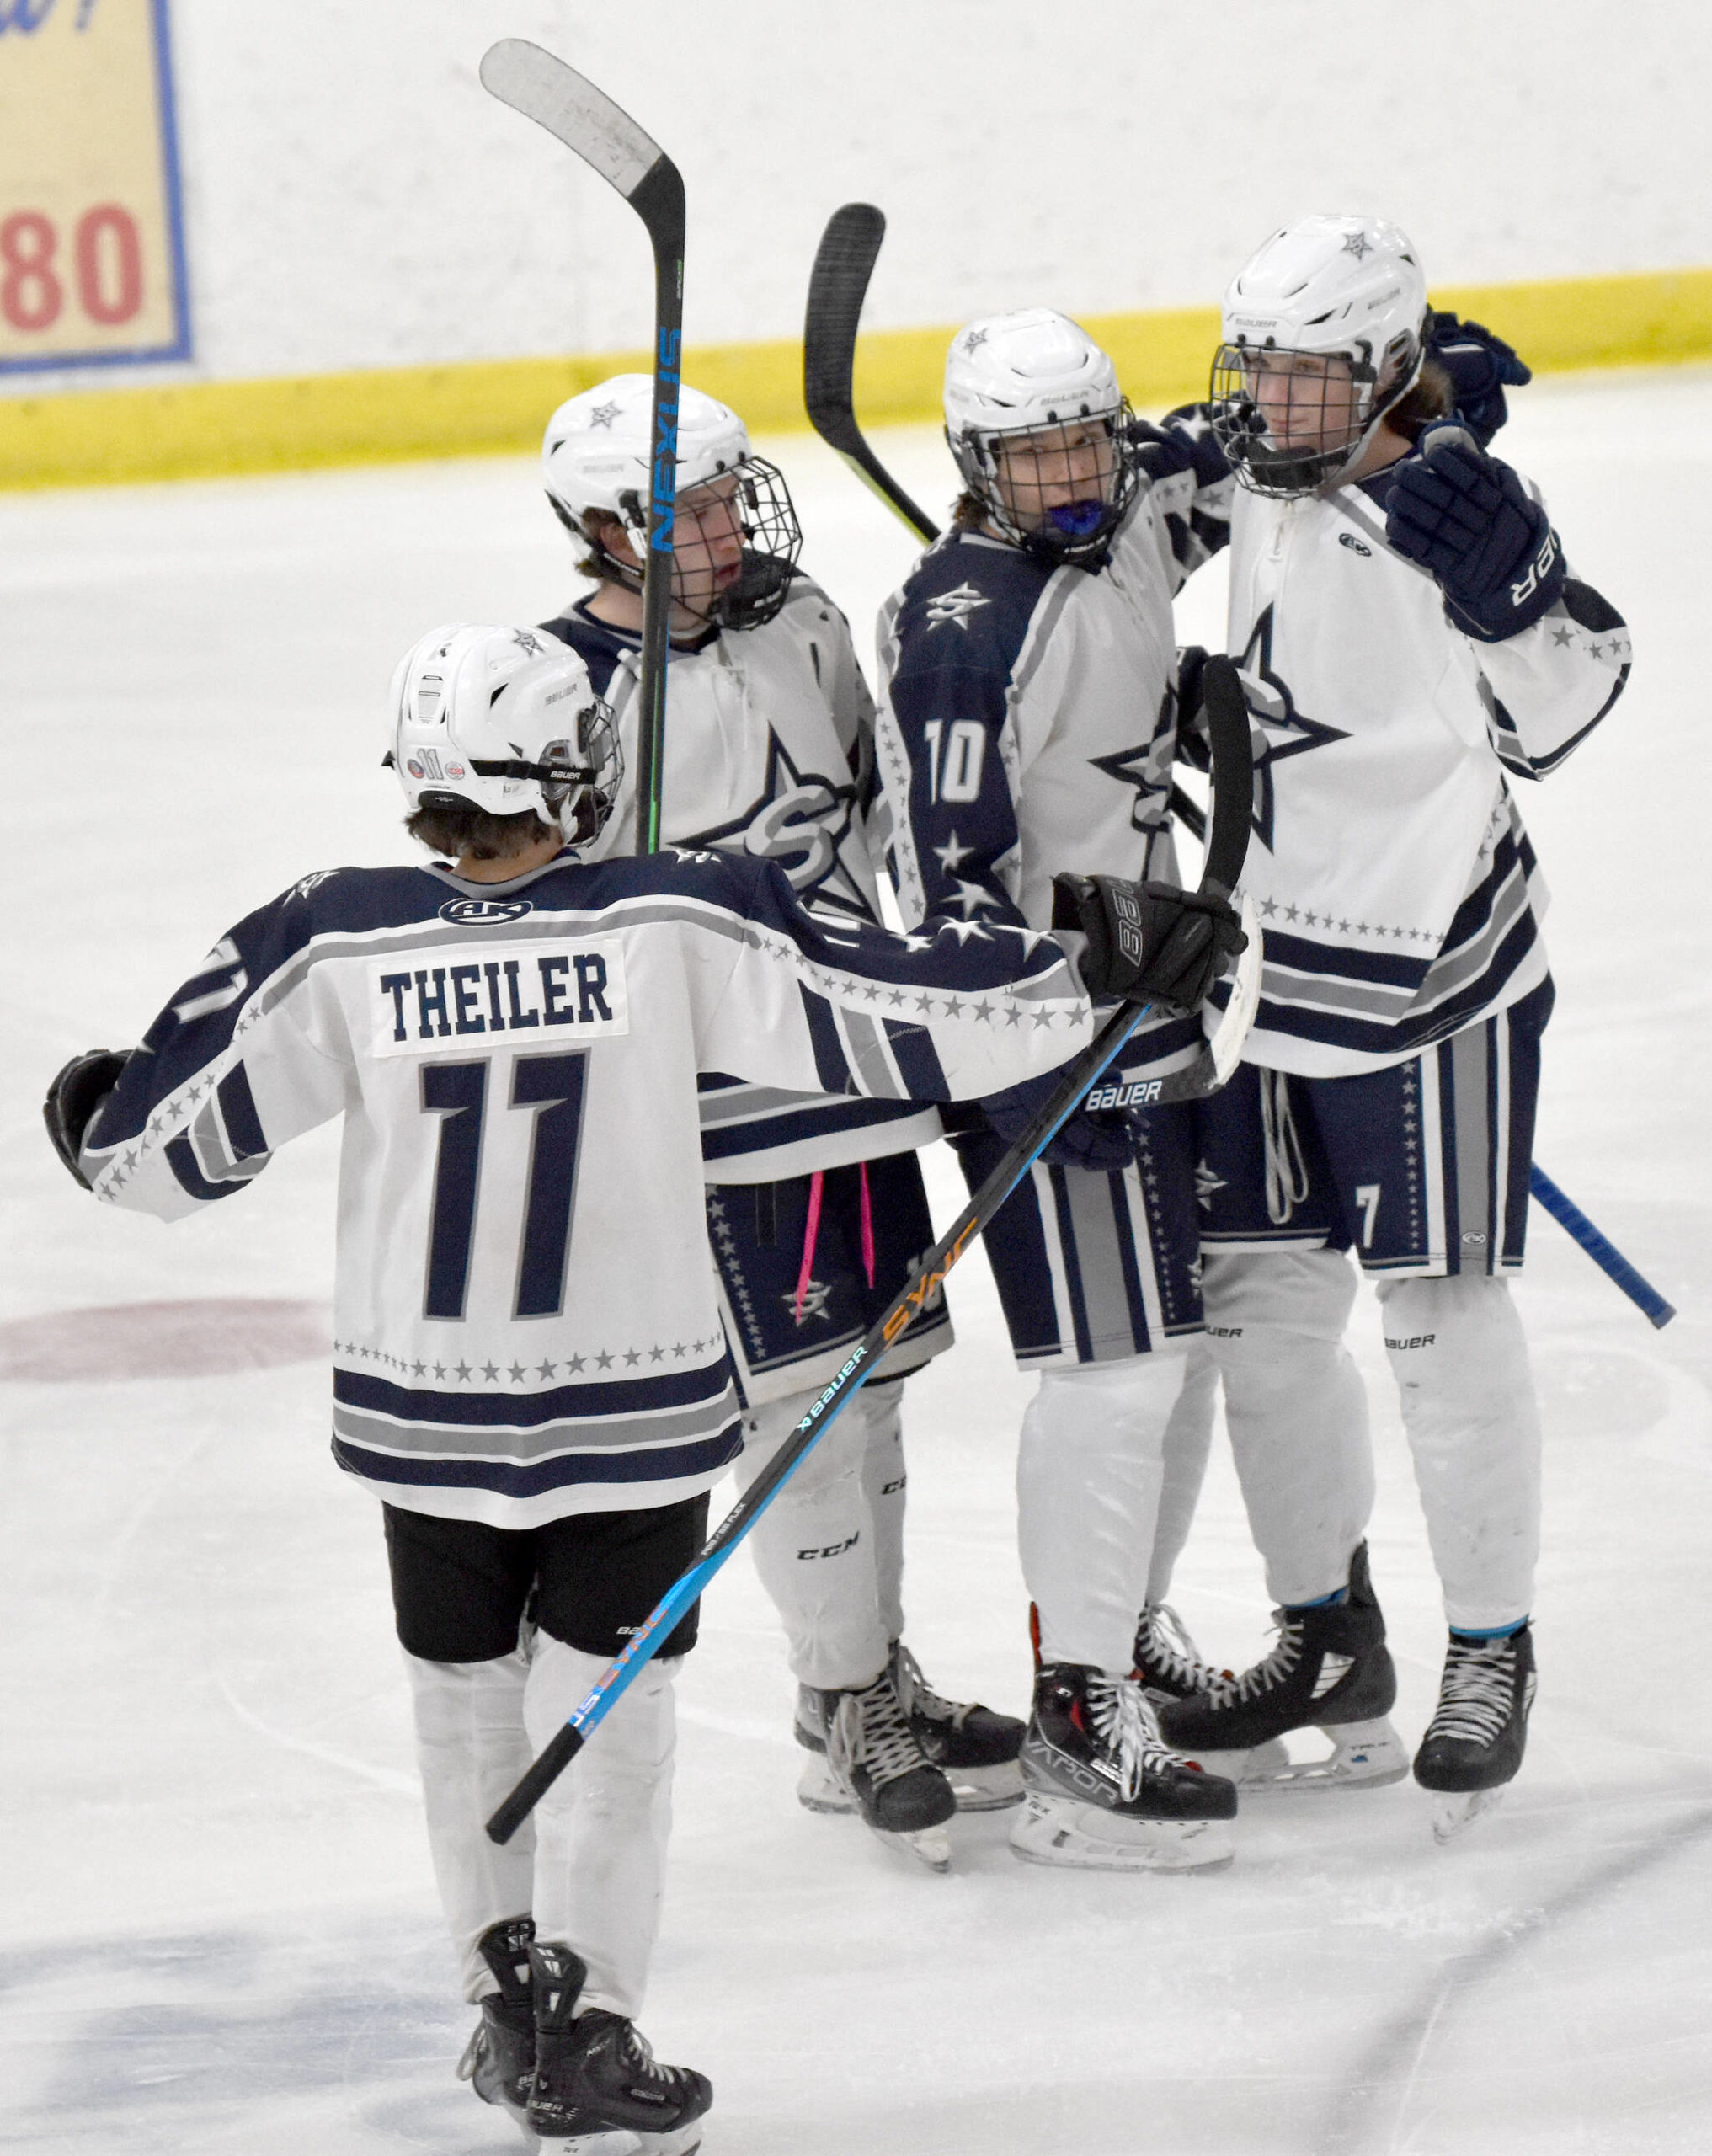 Soldotna celebrates a first-period goal by Jace Applehans (far right) on Friday, Dec. 2, 2022, at the Soldotna Regional Sports Complex in Soldotna, Alaska. (Photo by Jeff Helminiak/Peninsula Clarion)